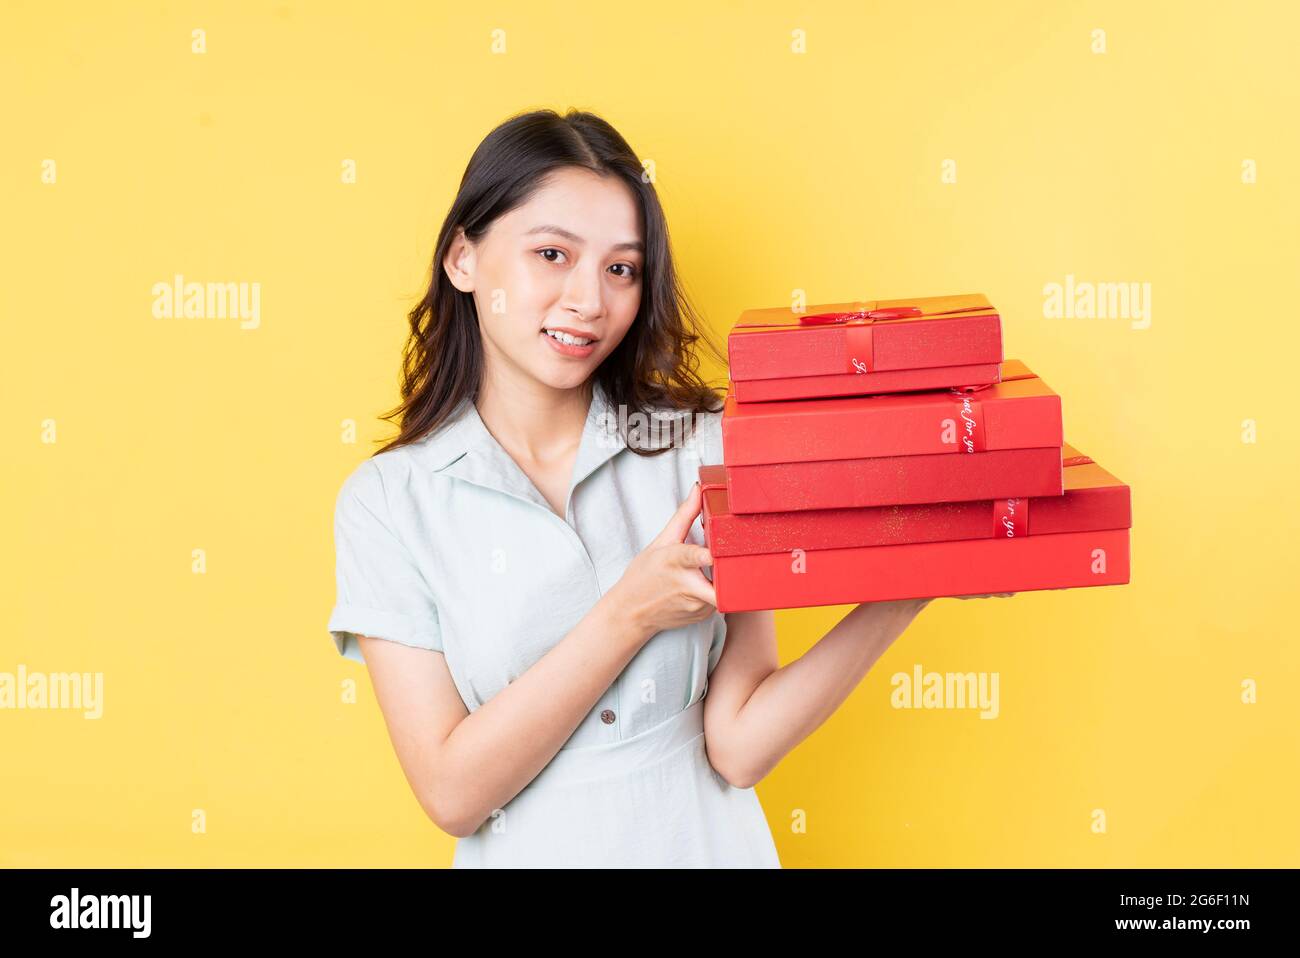 portrait of asian woman holding gift box Stock Photo